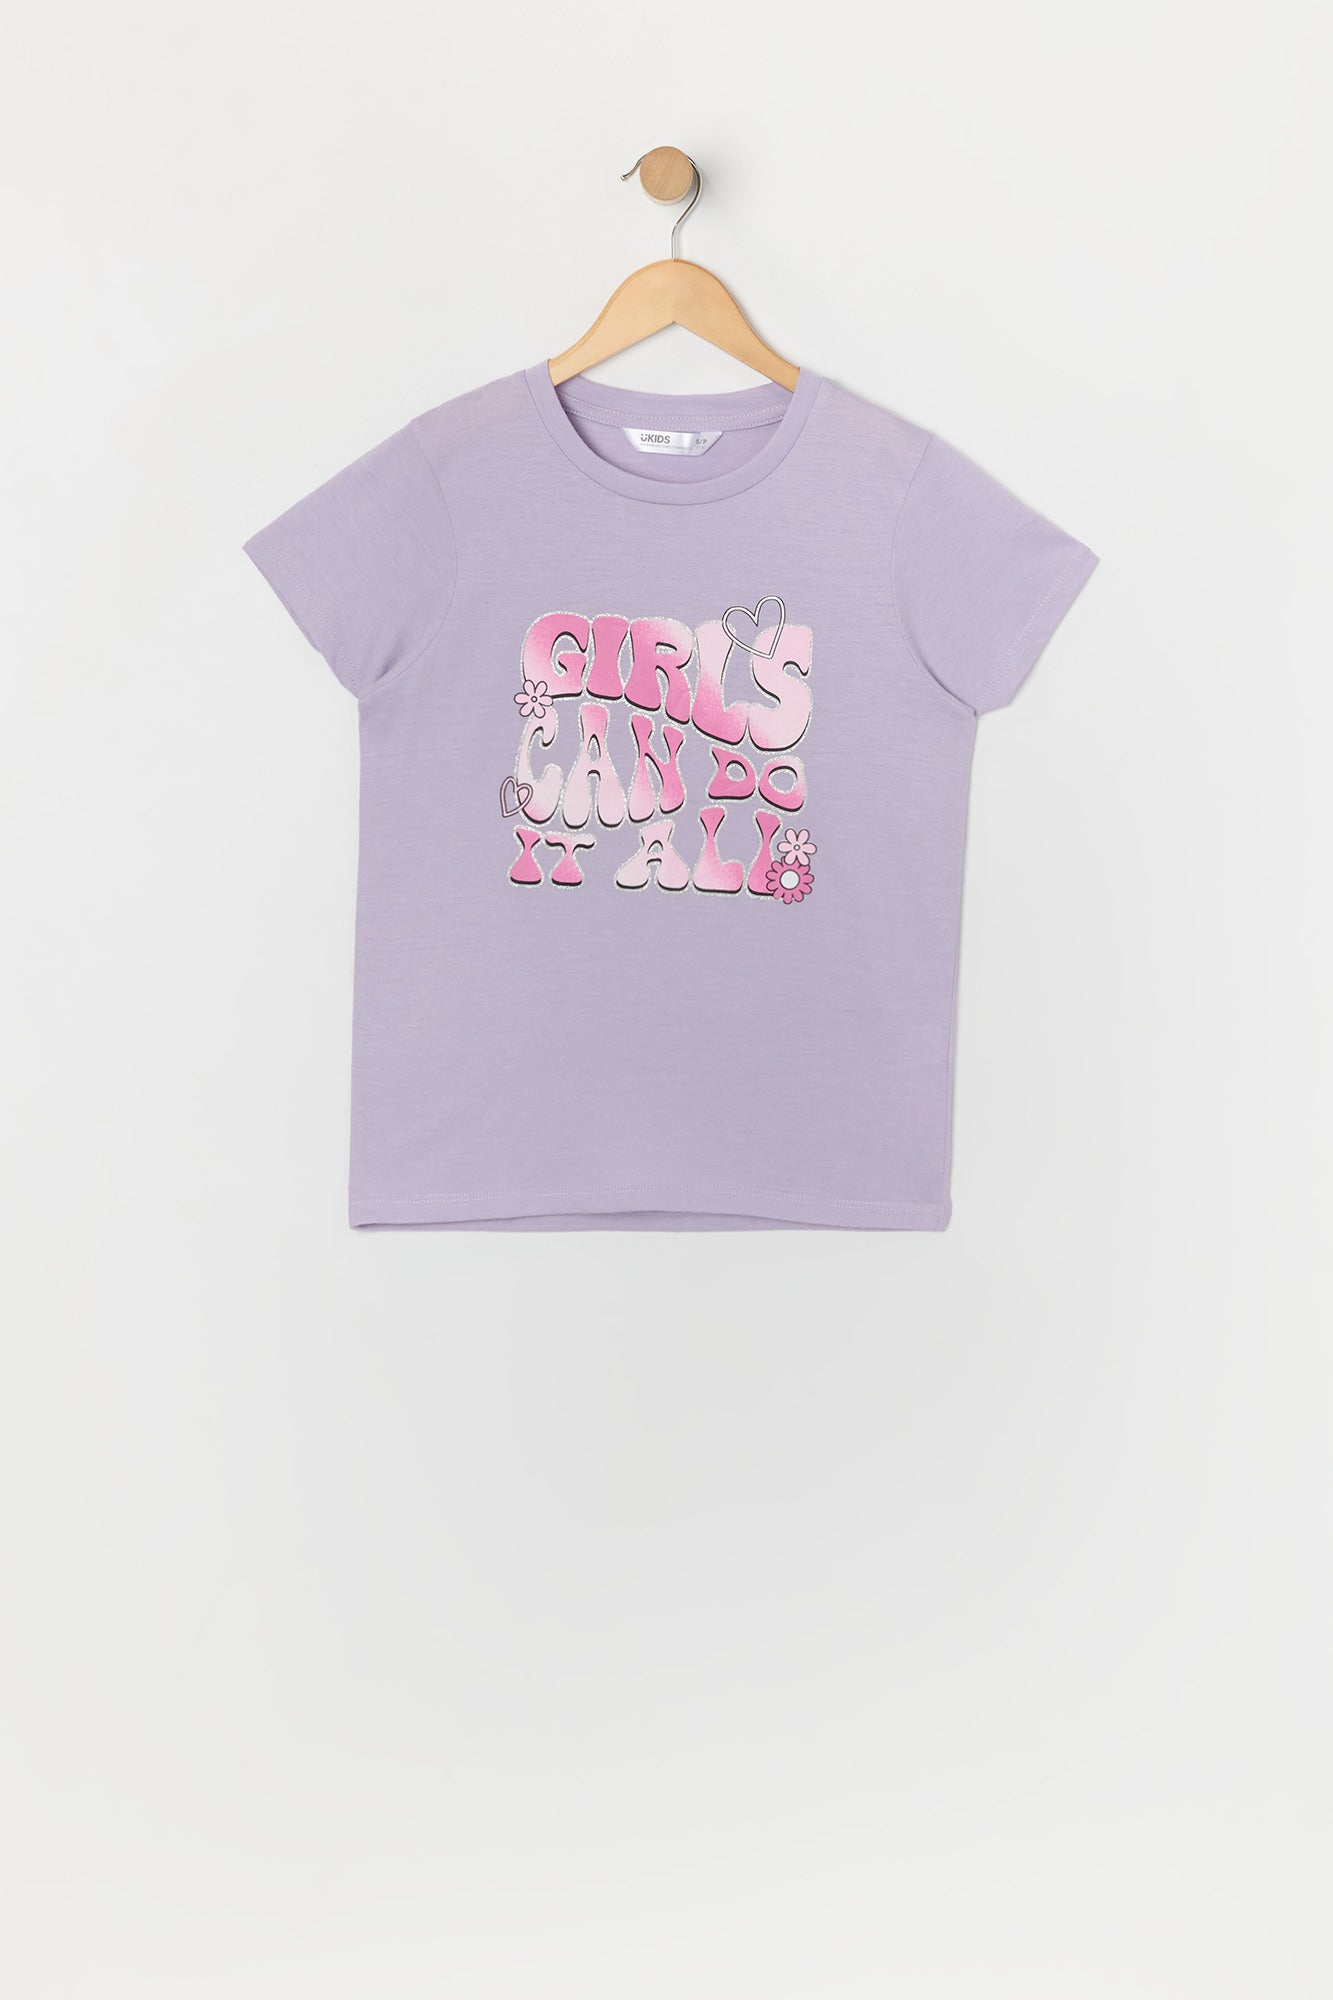 Girls Can Do it All Graphic T-Shirt